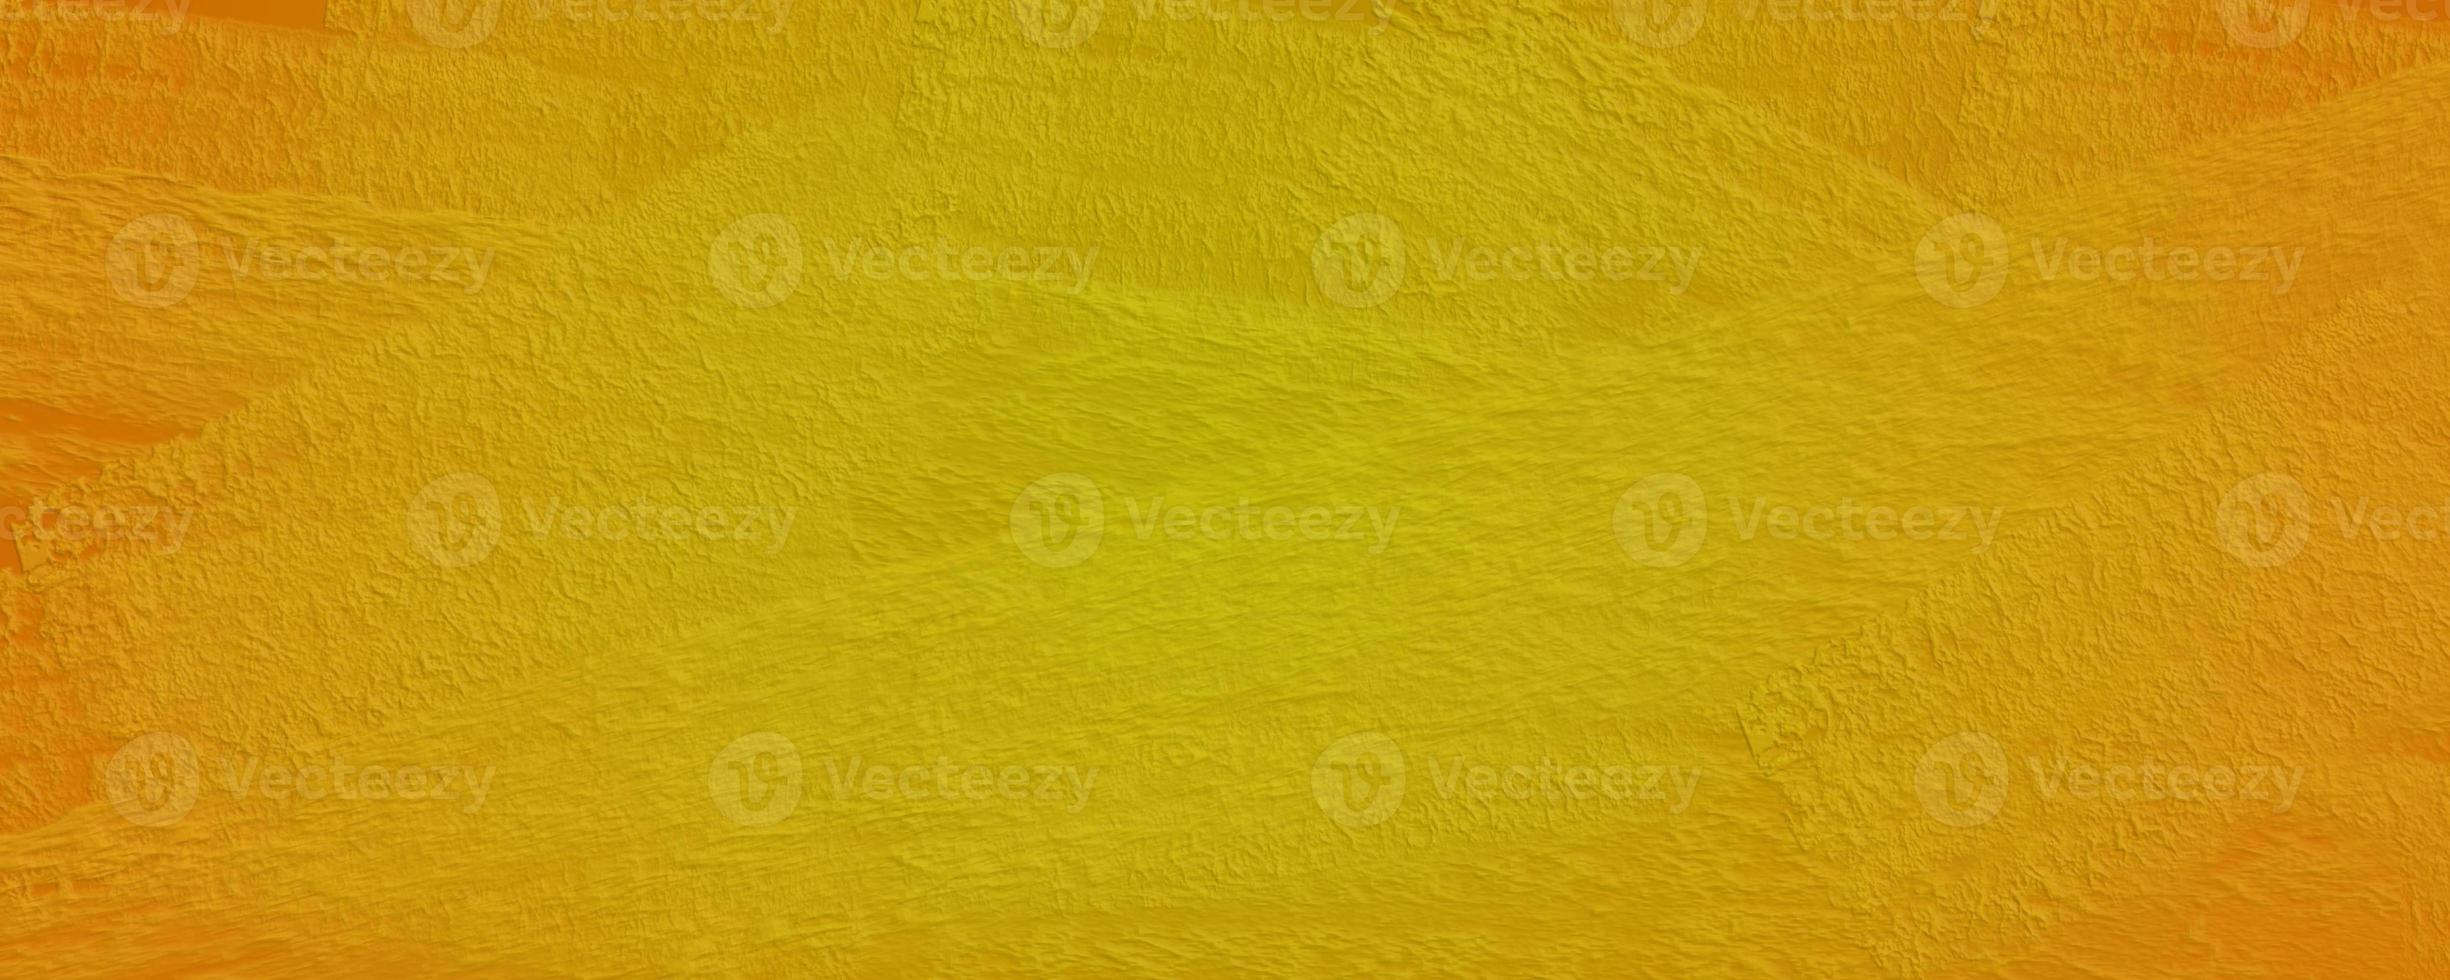 wallpaper brush pain rough for abstract background, logo background, yellow color photo